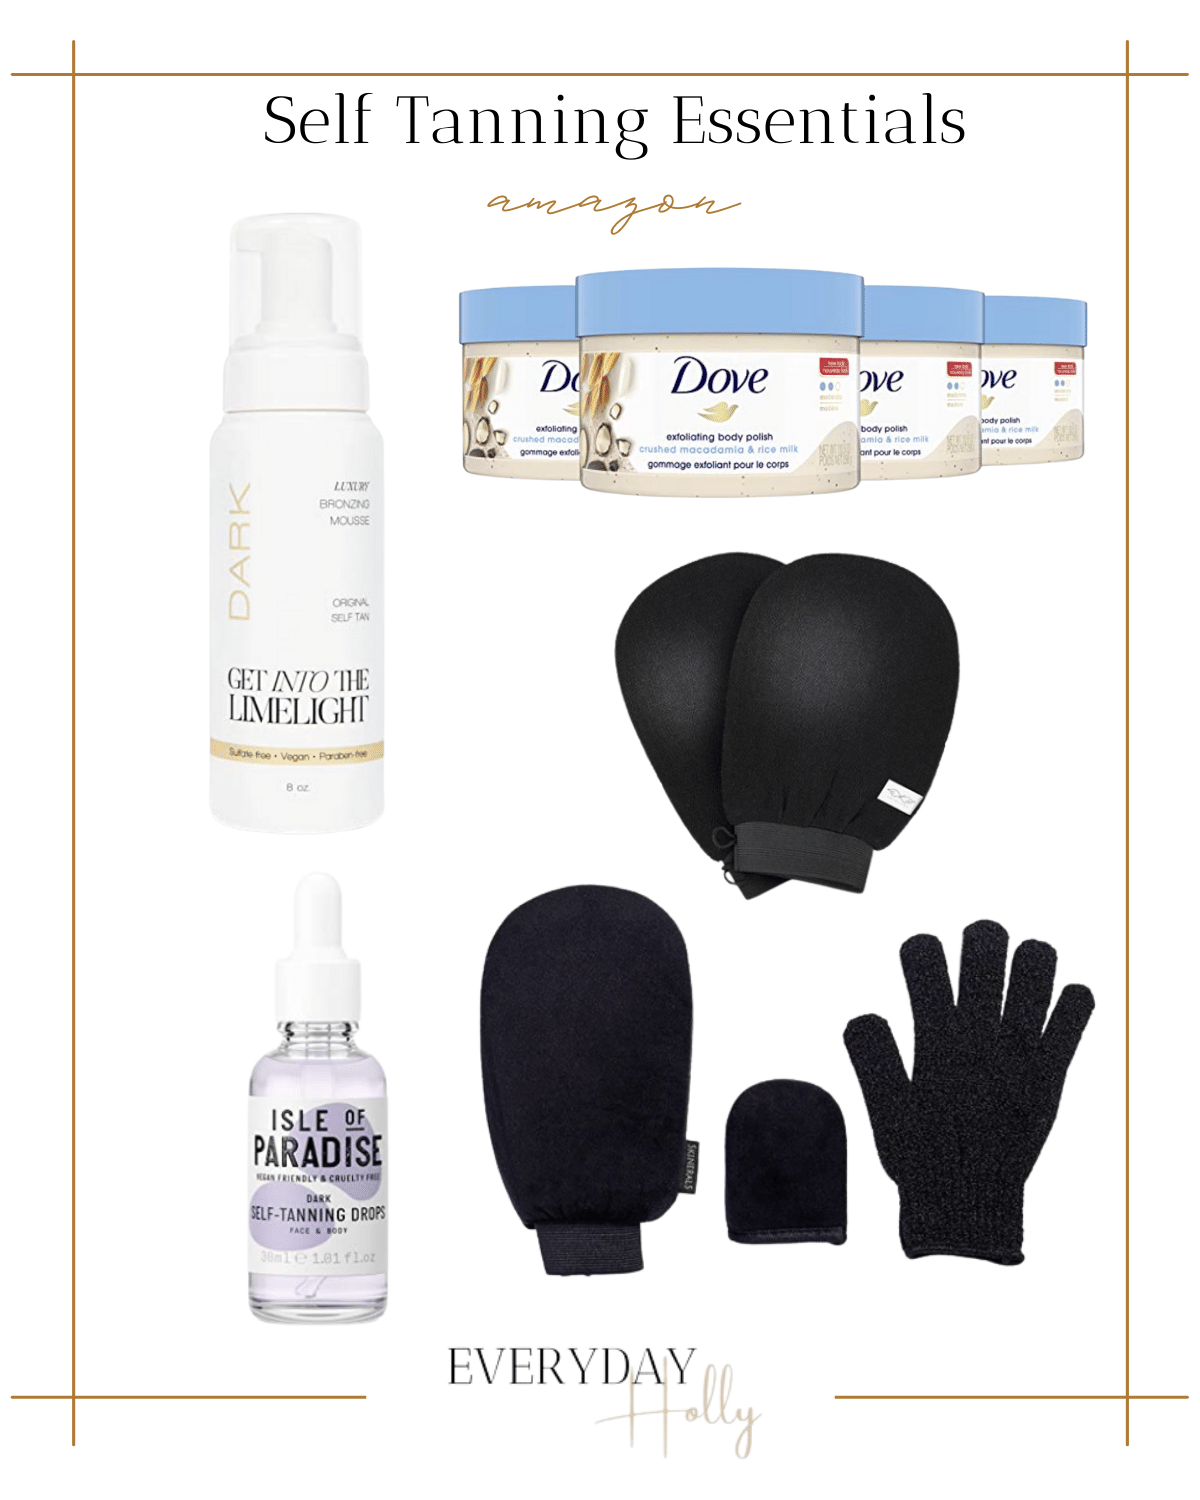 Self Tanning Favorites

#vacation #tropical #beachvacation #beachfamilyvacation #summerpacking #summertravel #travel #travelingchecklist #beachchecklist #summervacation #summertravellist #amazon #amazonfinds #amazonfashion #affordableamazon #affordablefashion #amazonfashion #dove #selftanning #selftanner #isleofparadise